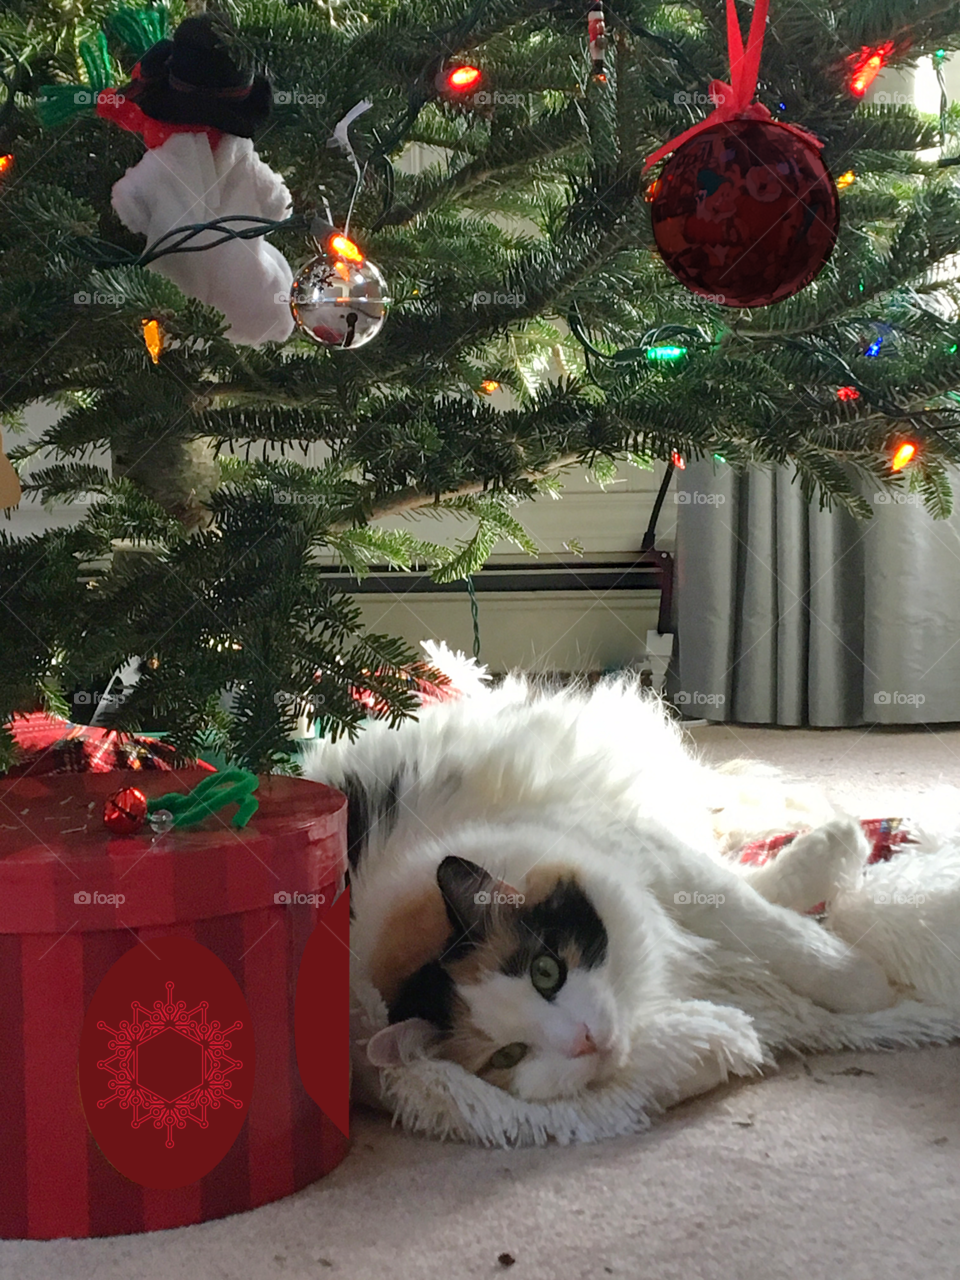 A fluffy calico cat lounges under a decorated Christmas tree next to a Red wrapped present